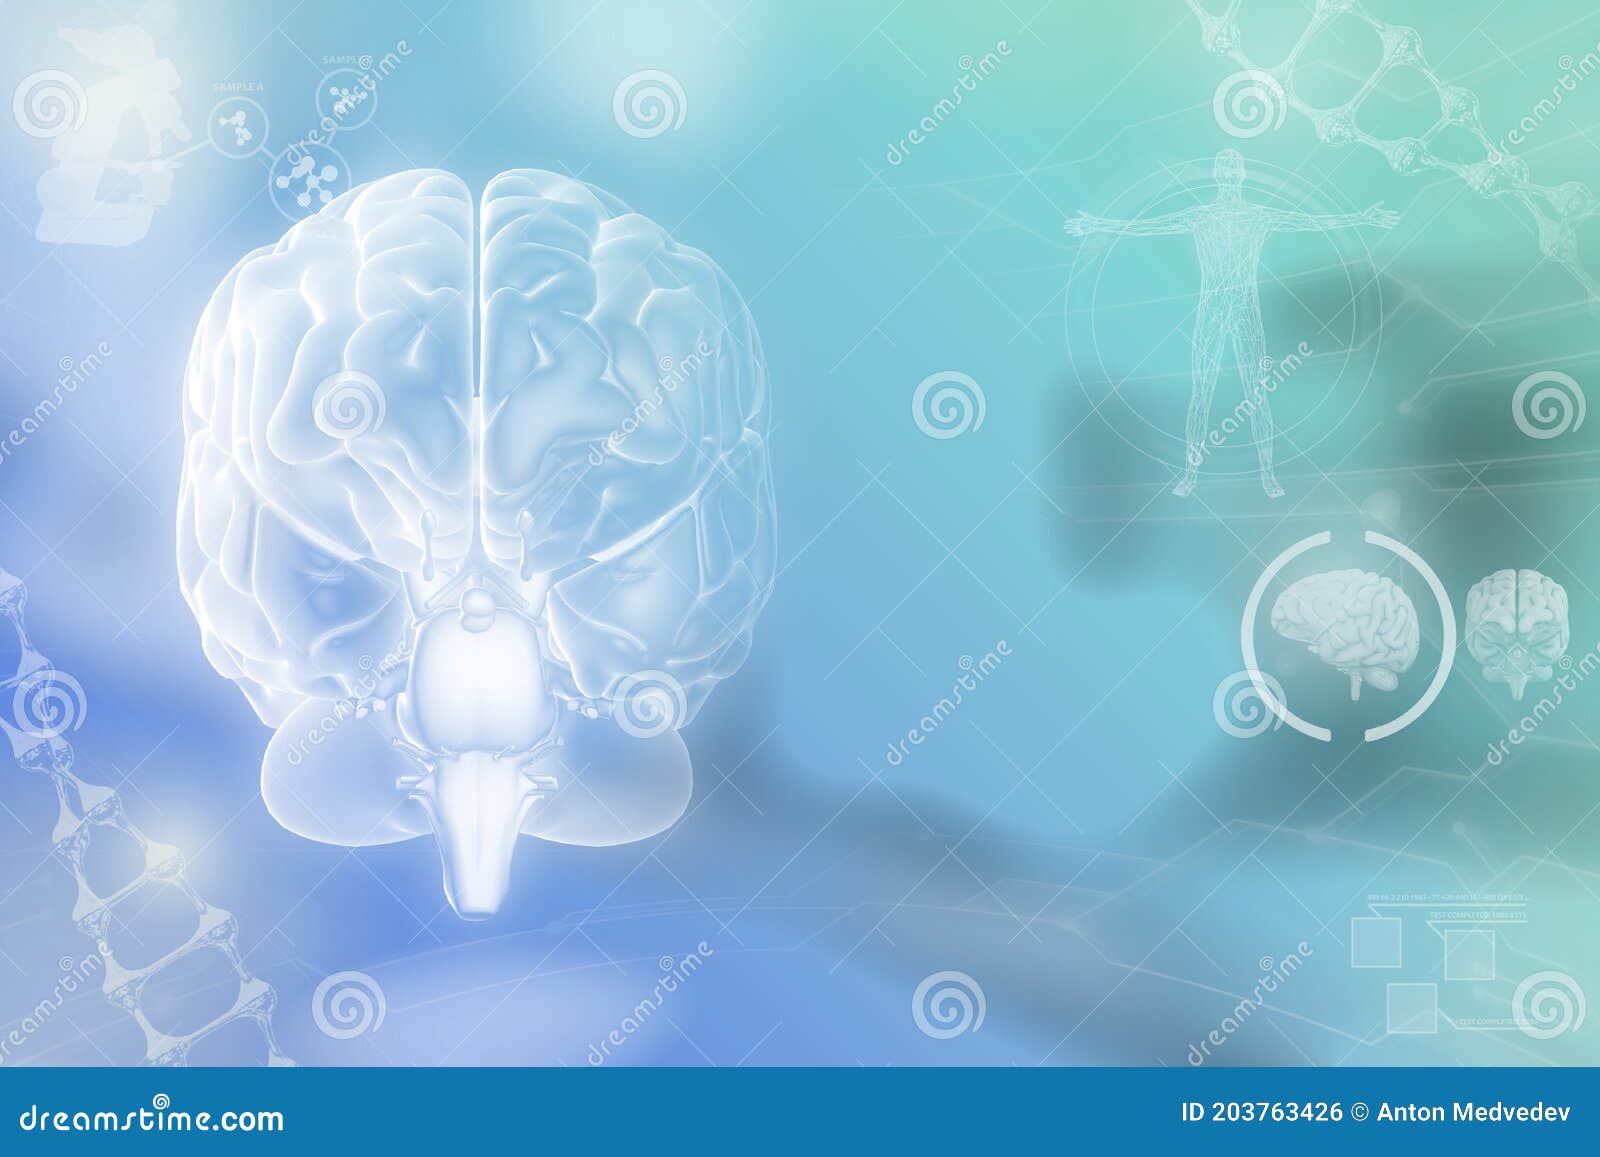 Medical 3D Illustration - Human Brain, Intelligence Discovery Concept ...